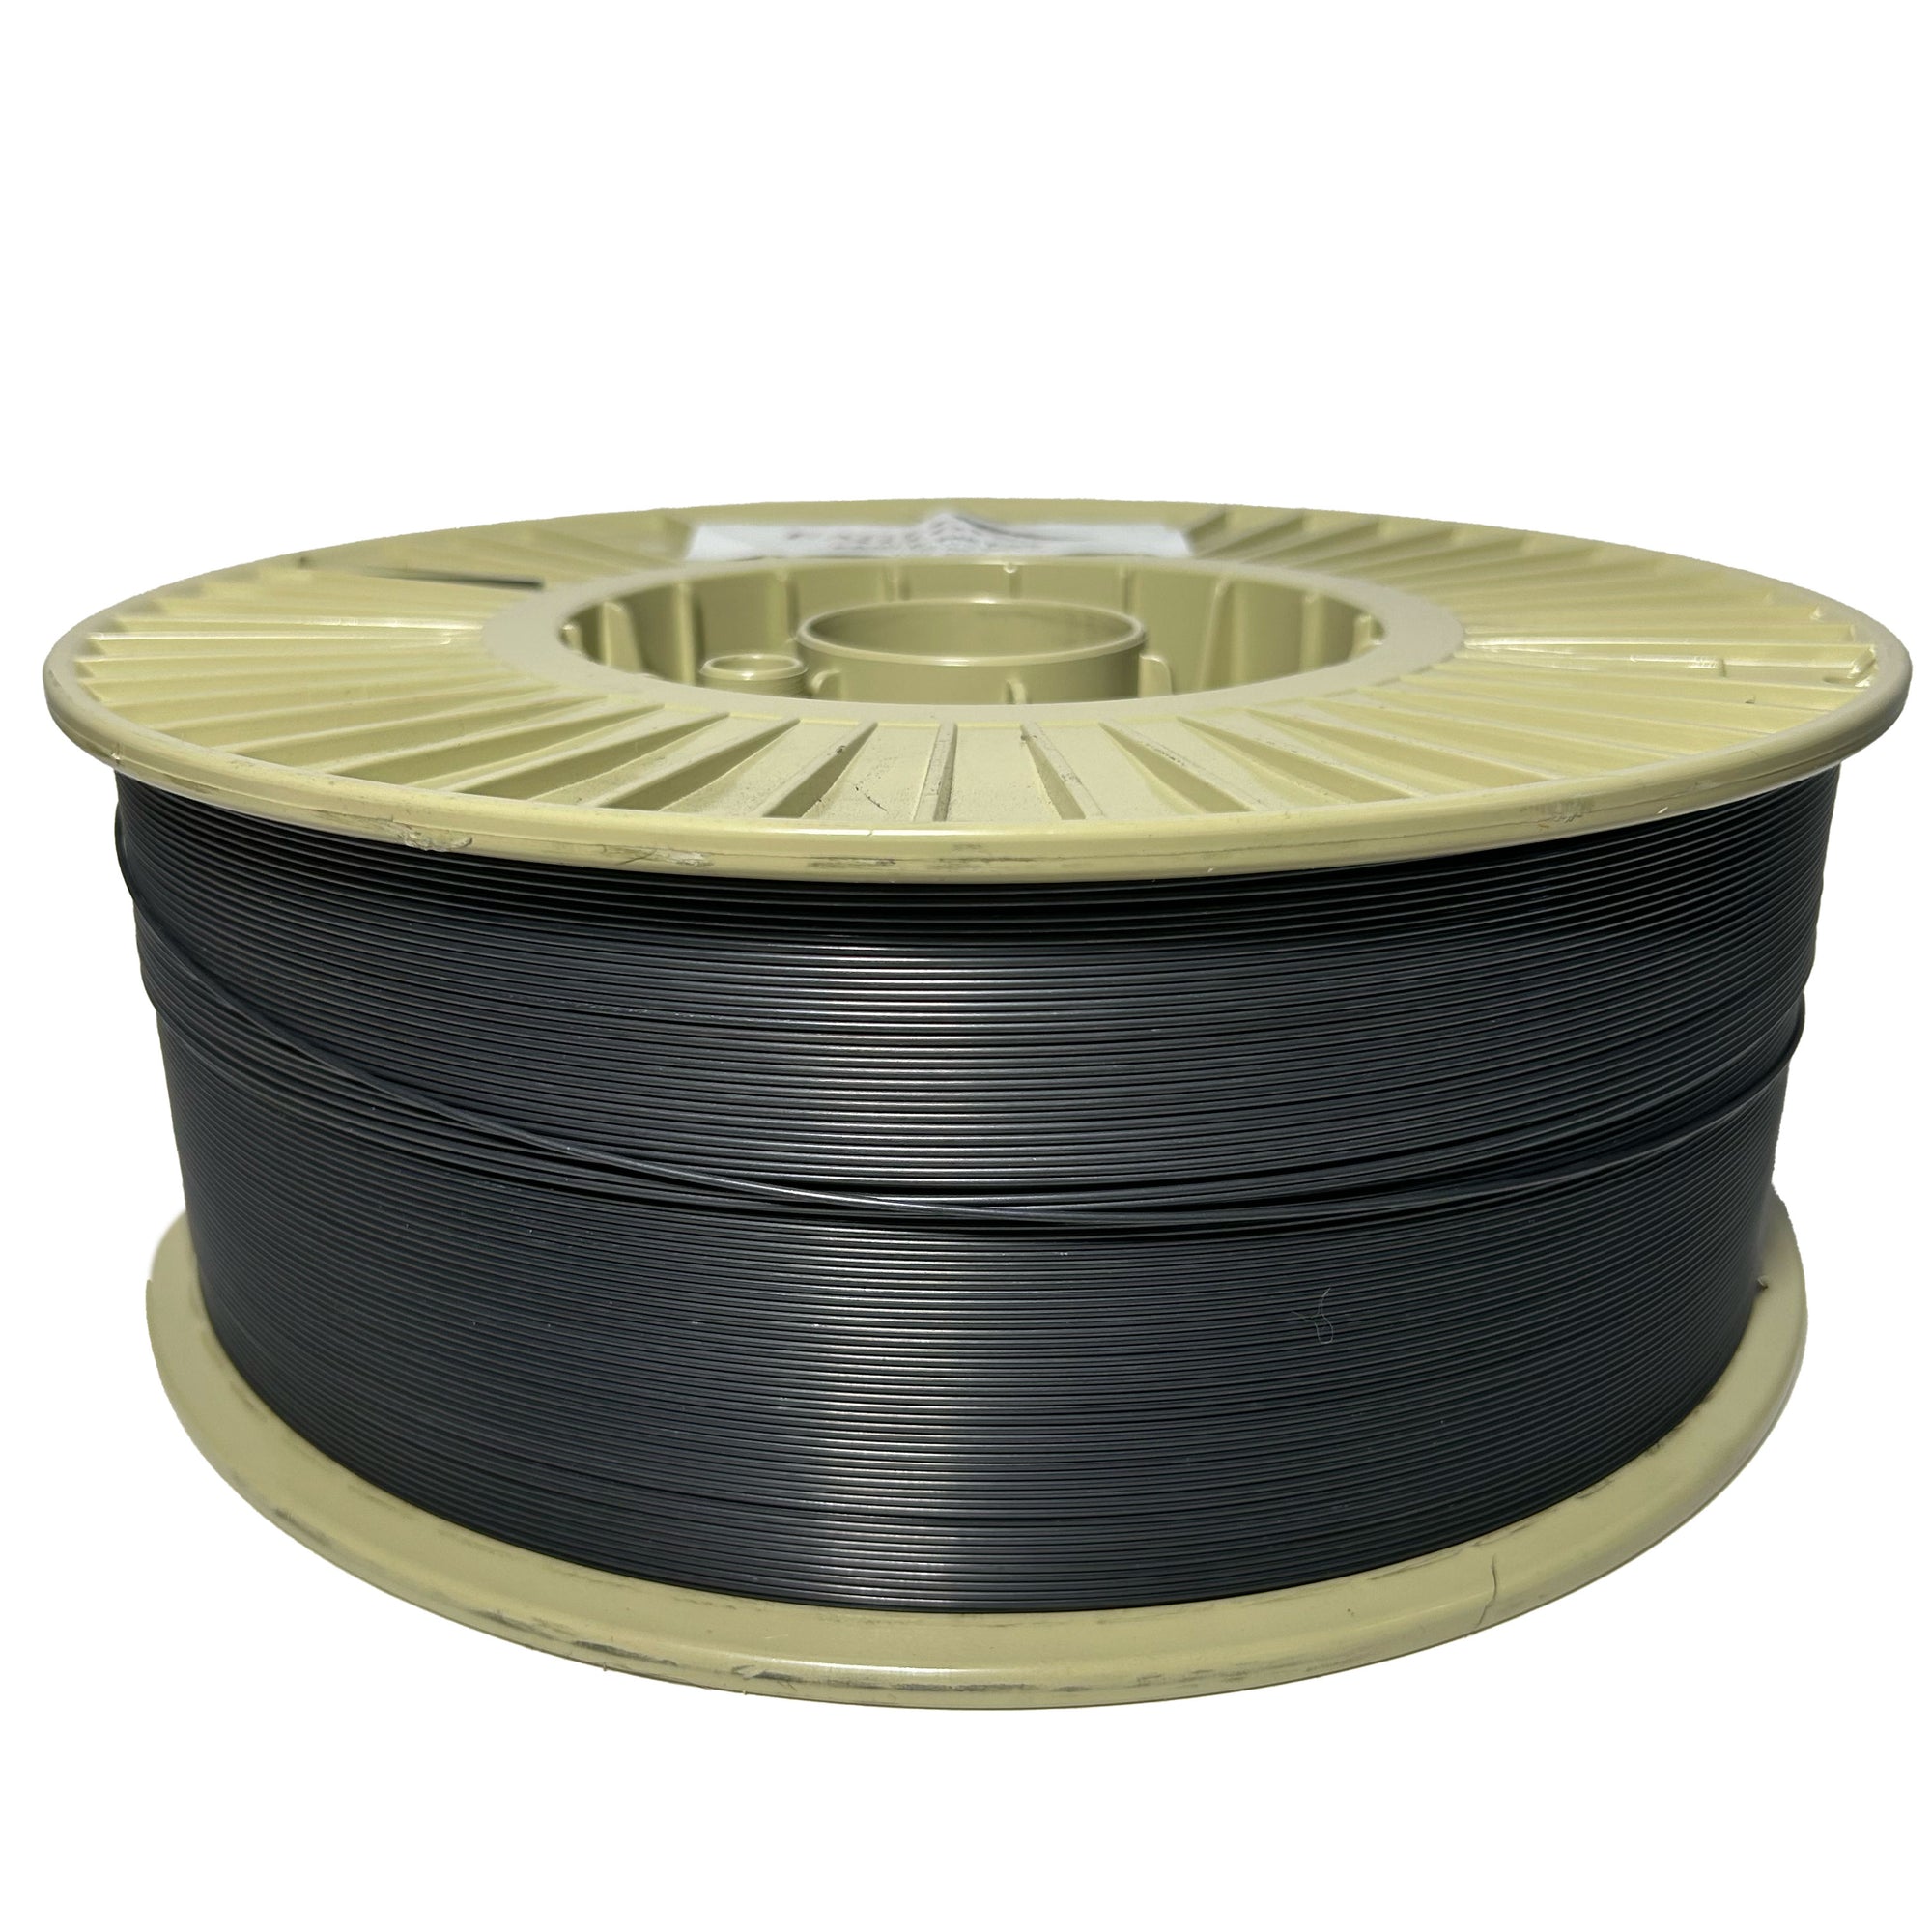 EAGLE 545 FGS | All Position, High Deposition, Machinable, Gas Shielded Flux Cored Wire For Build-up